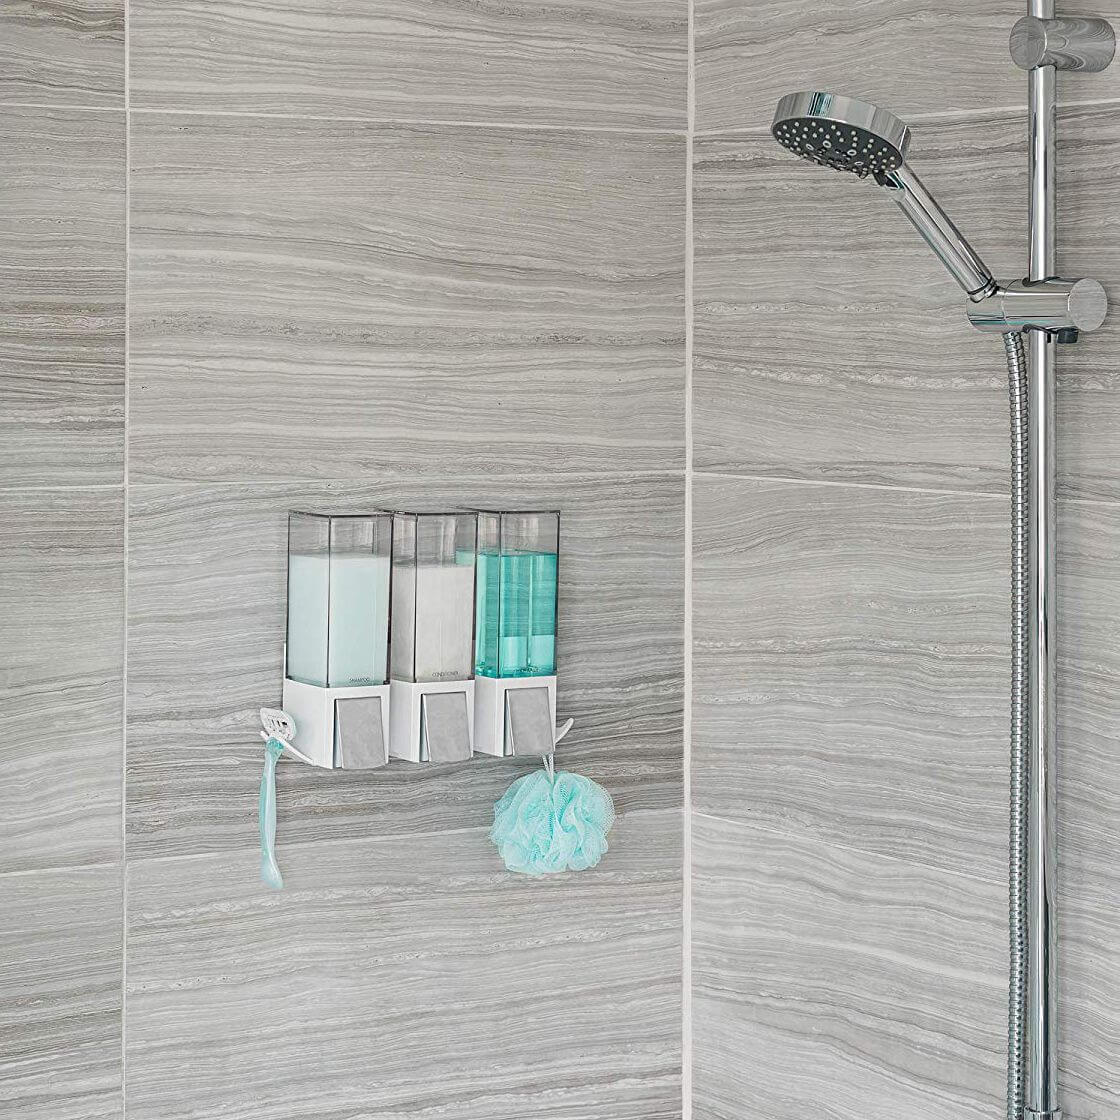 A white shower soap dispenser attached to a tiled shower wall with silicone glue